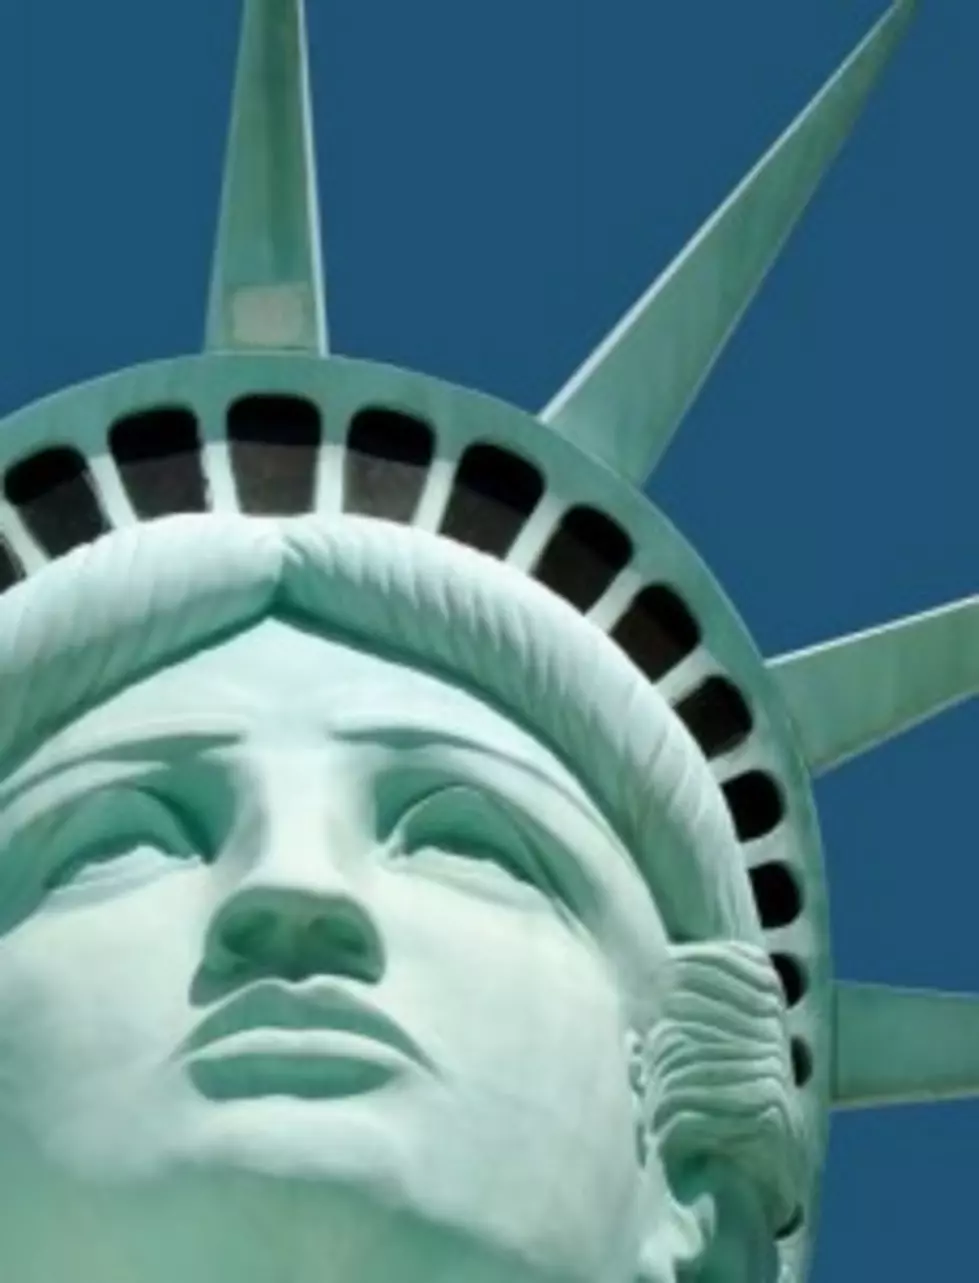 &#8220;That&#8217;s the Wrong Statue of Liberty&#8221; and Other Postage Stamp Fails